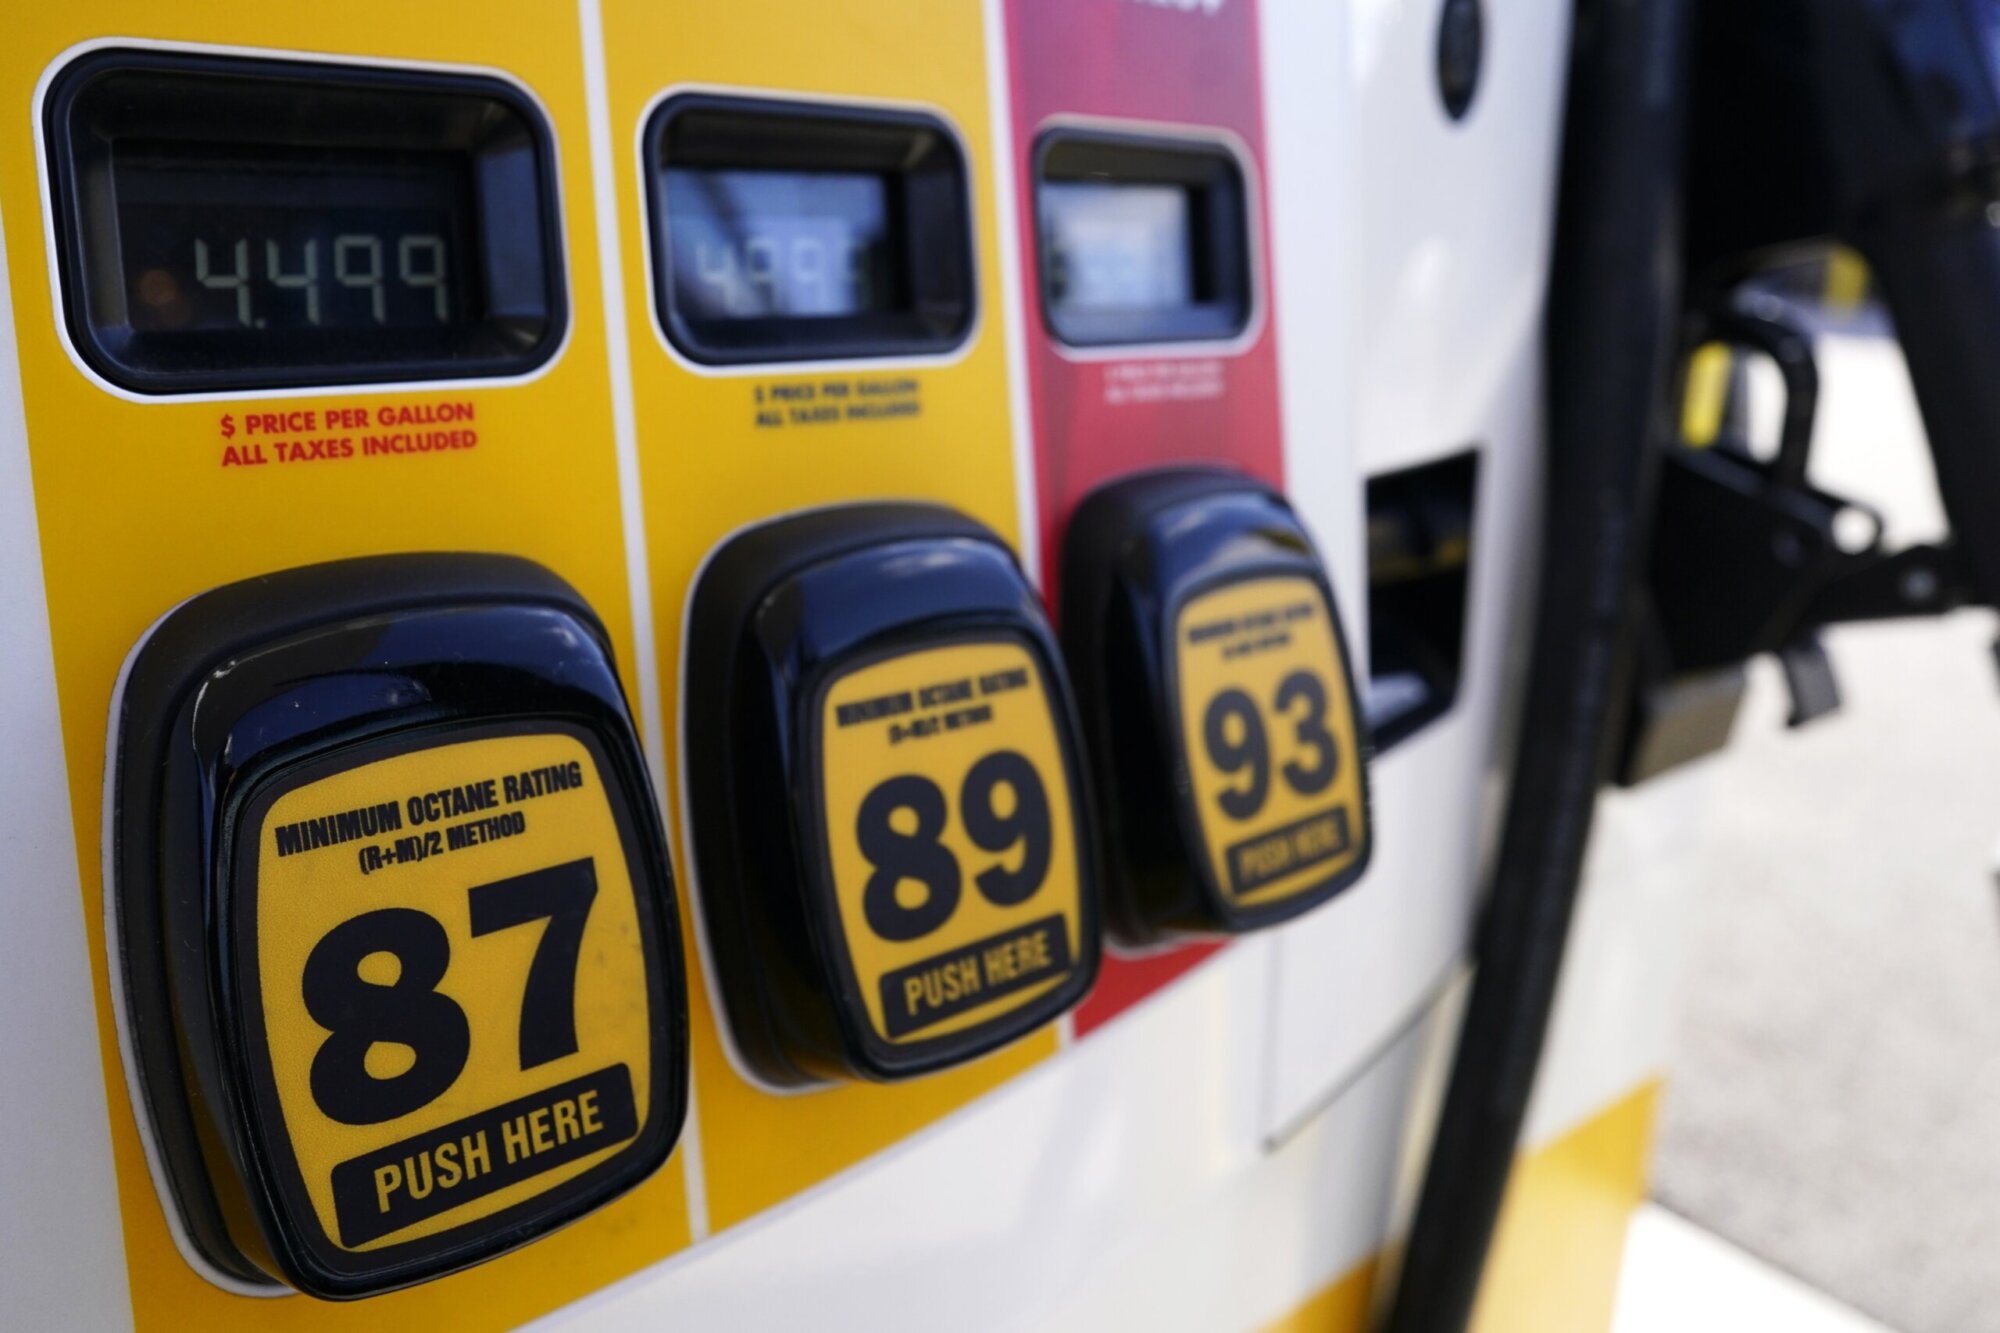 Analyst on why gas prices are so high